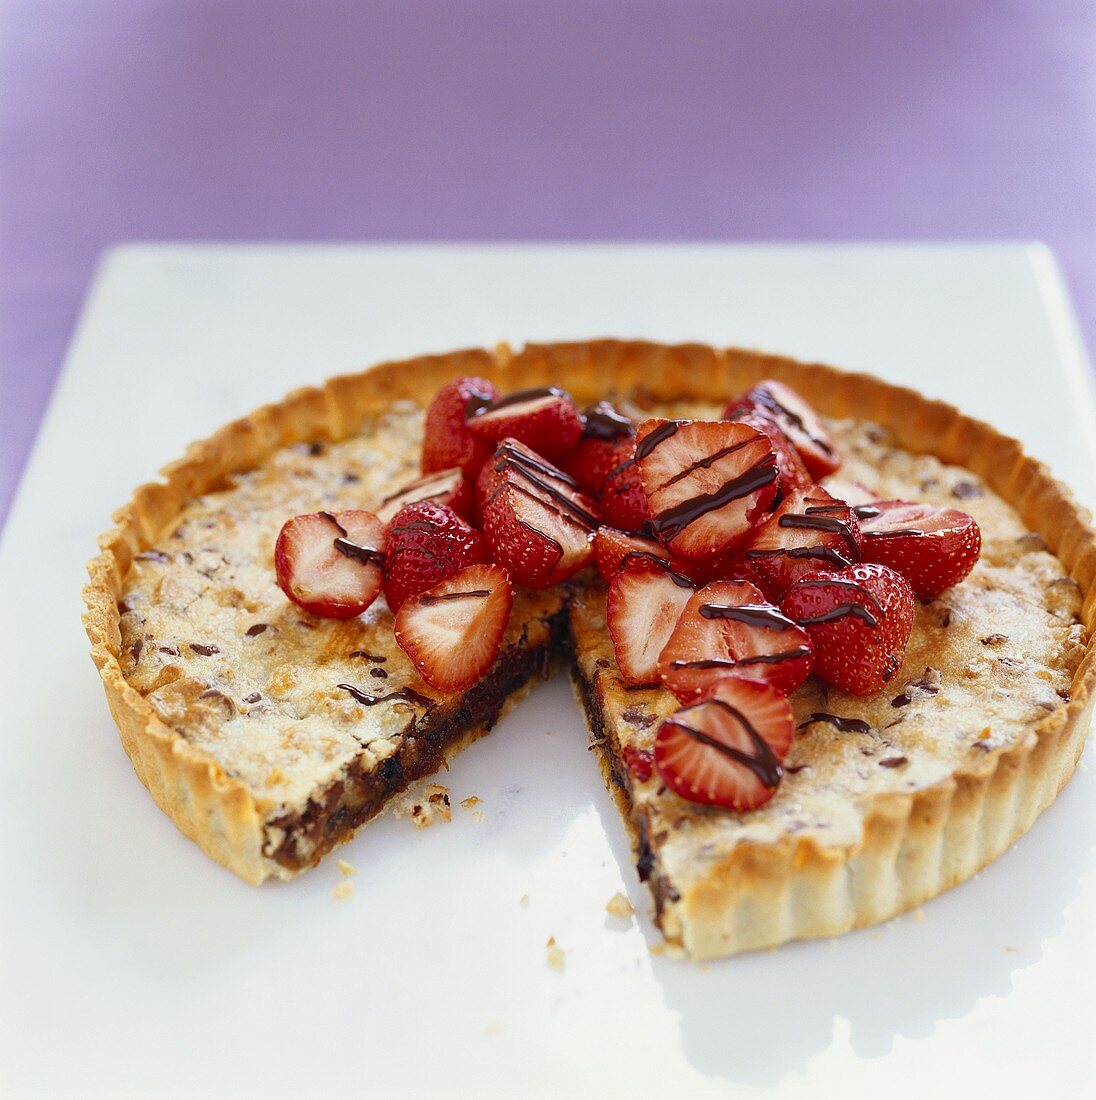 Chocolate and walnut tart with strawberries, a piece cut